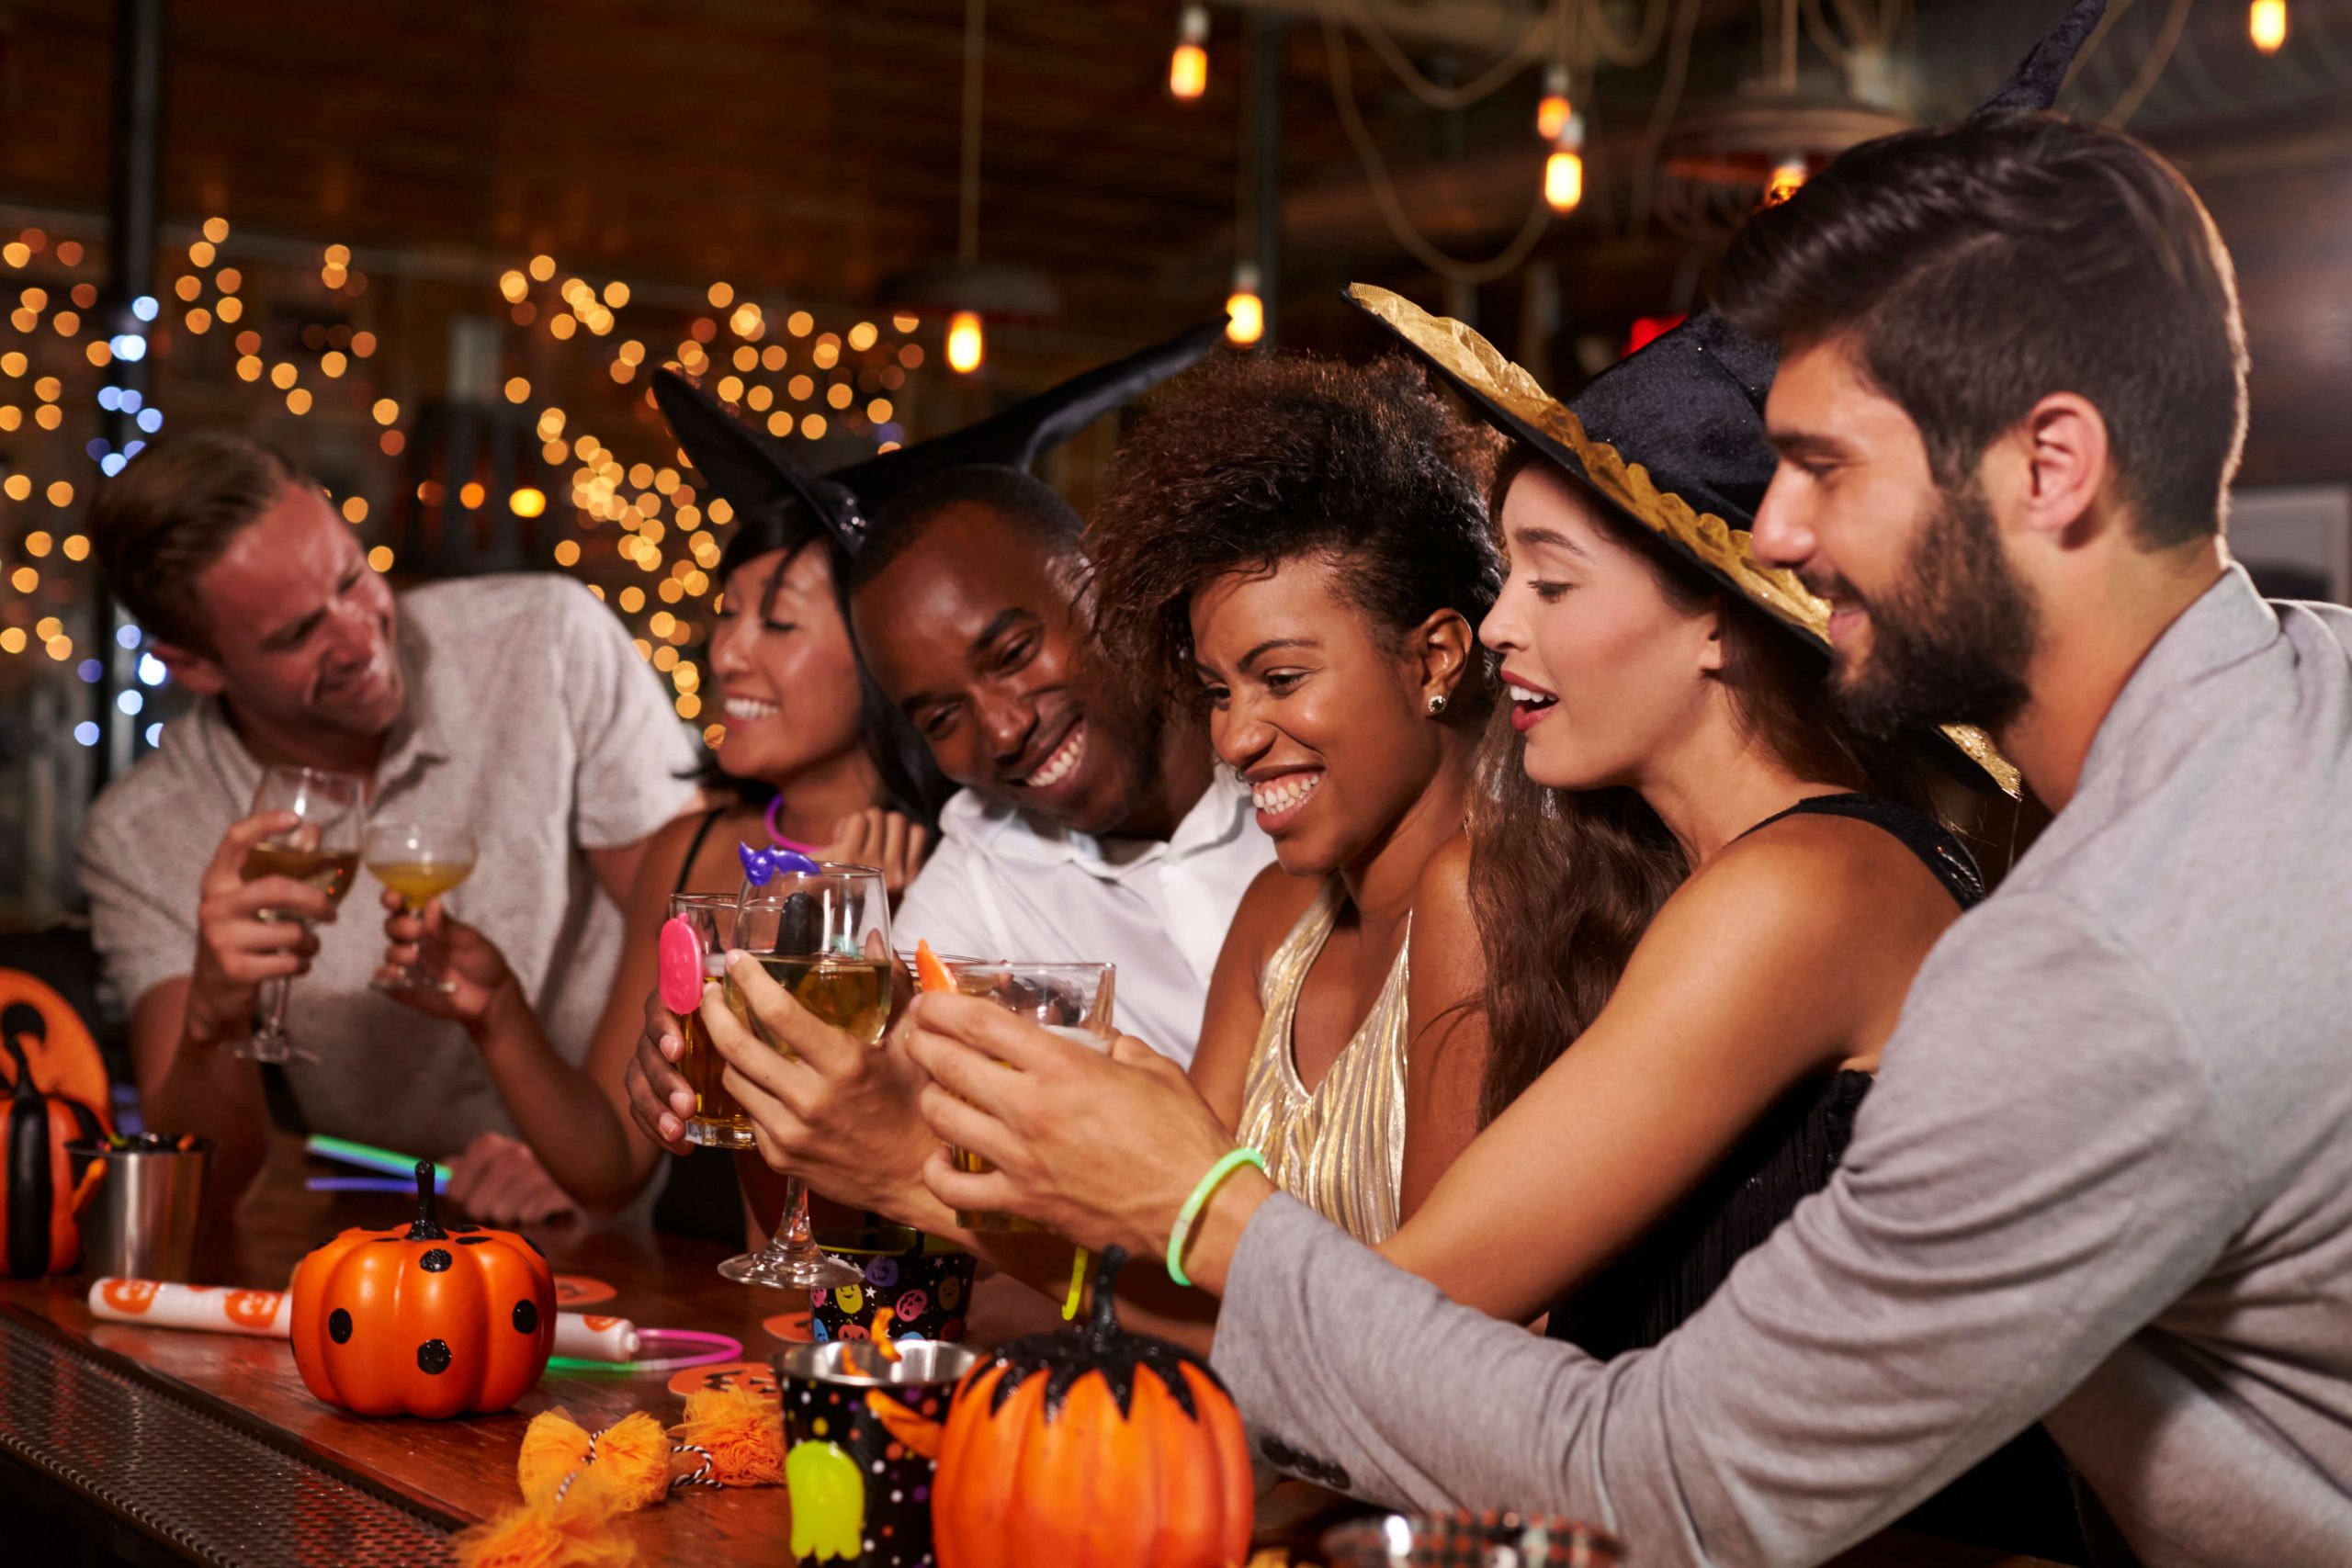 Pumpkin Spice up Your Bar’s Halloween with these Frightfully Fun Halloween Ideas